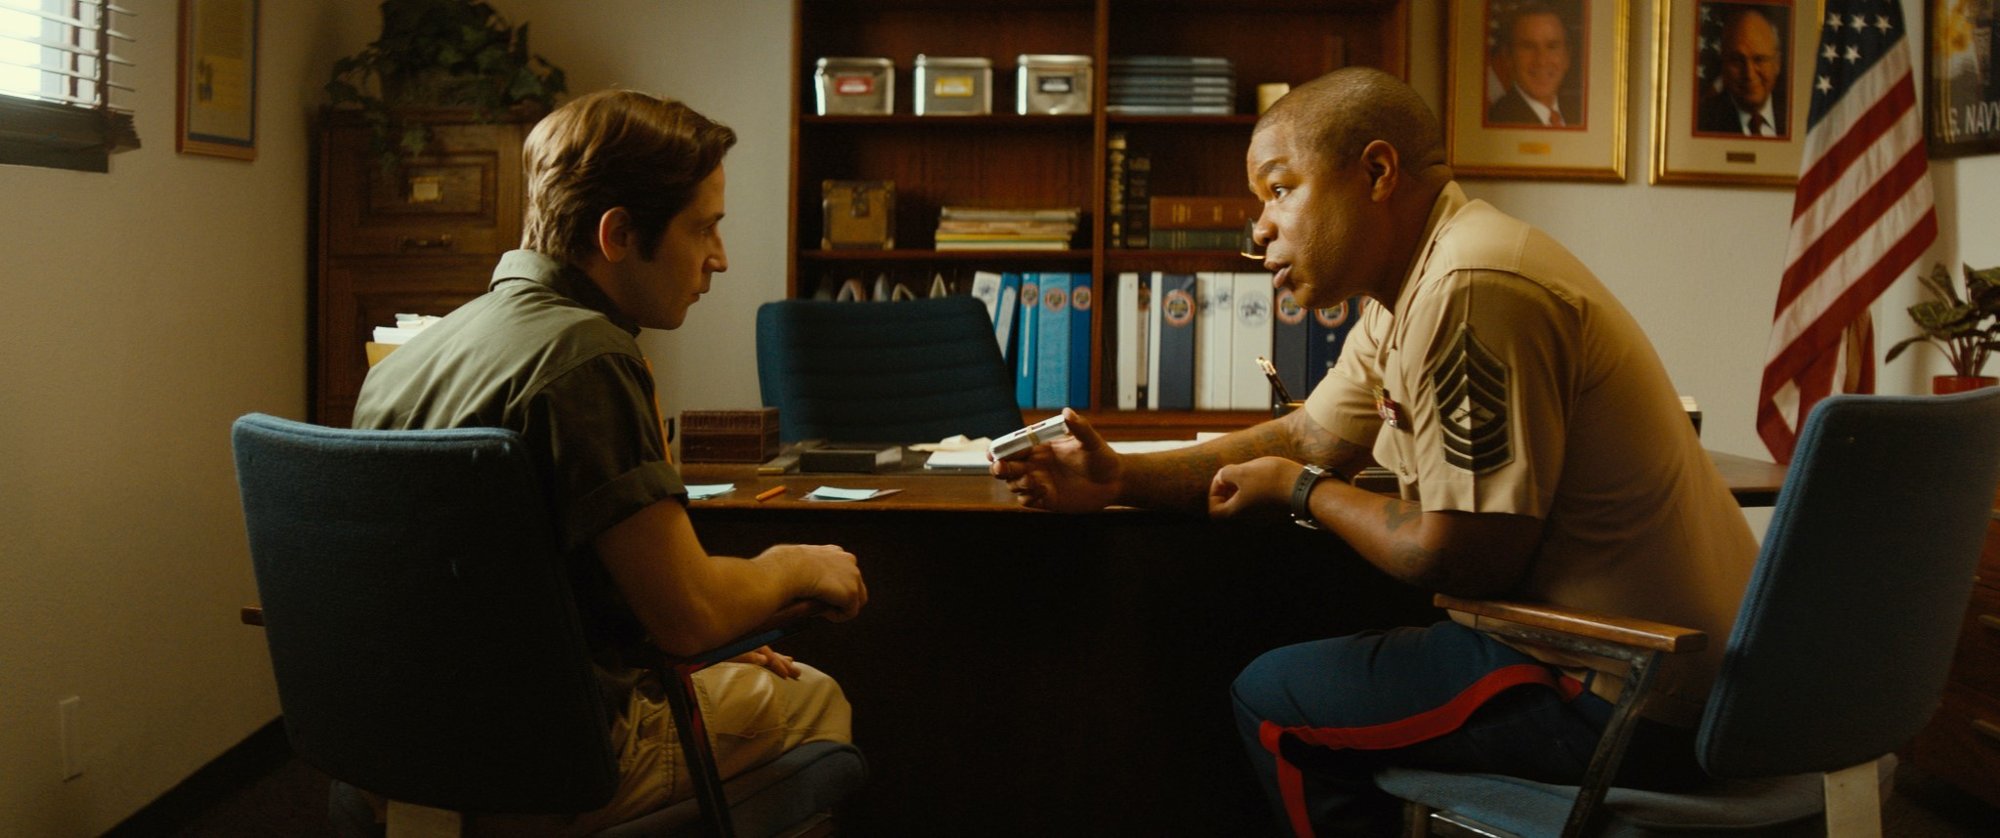 Michael Angarano stars as Ned Chipley and Xzibit stars as Master Sgt. Jenkins in Netflix's Sun Dogs (2018)